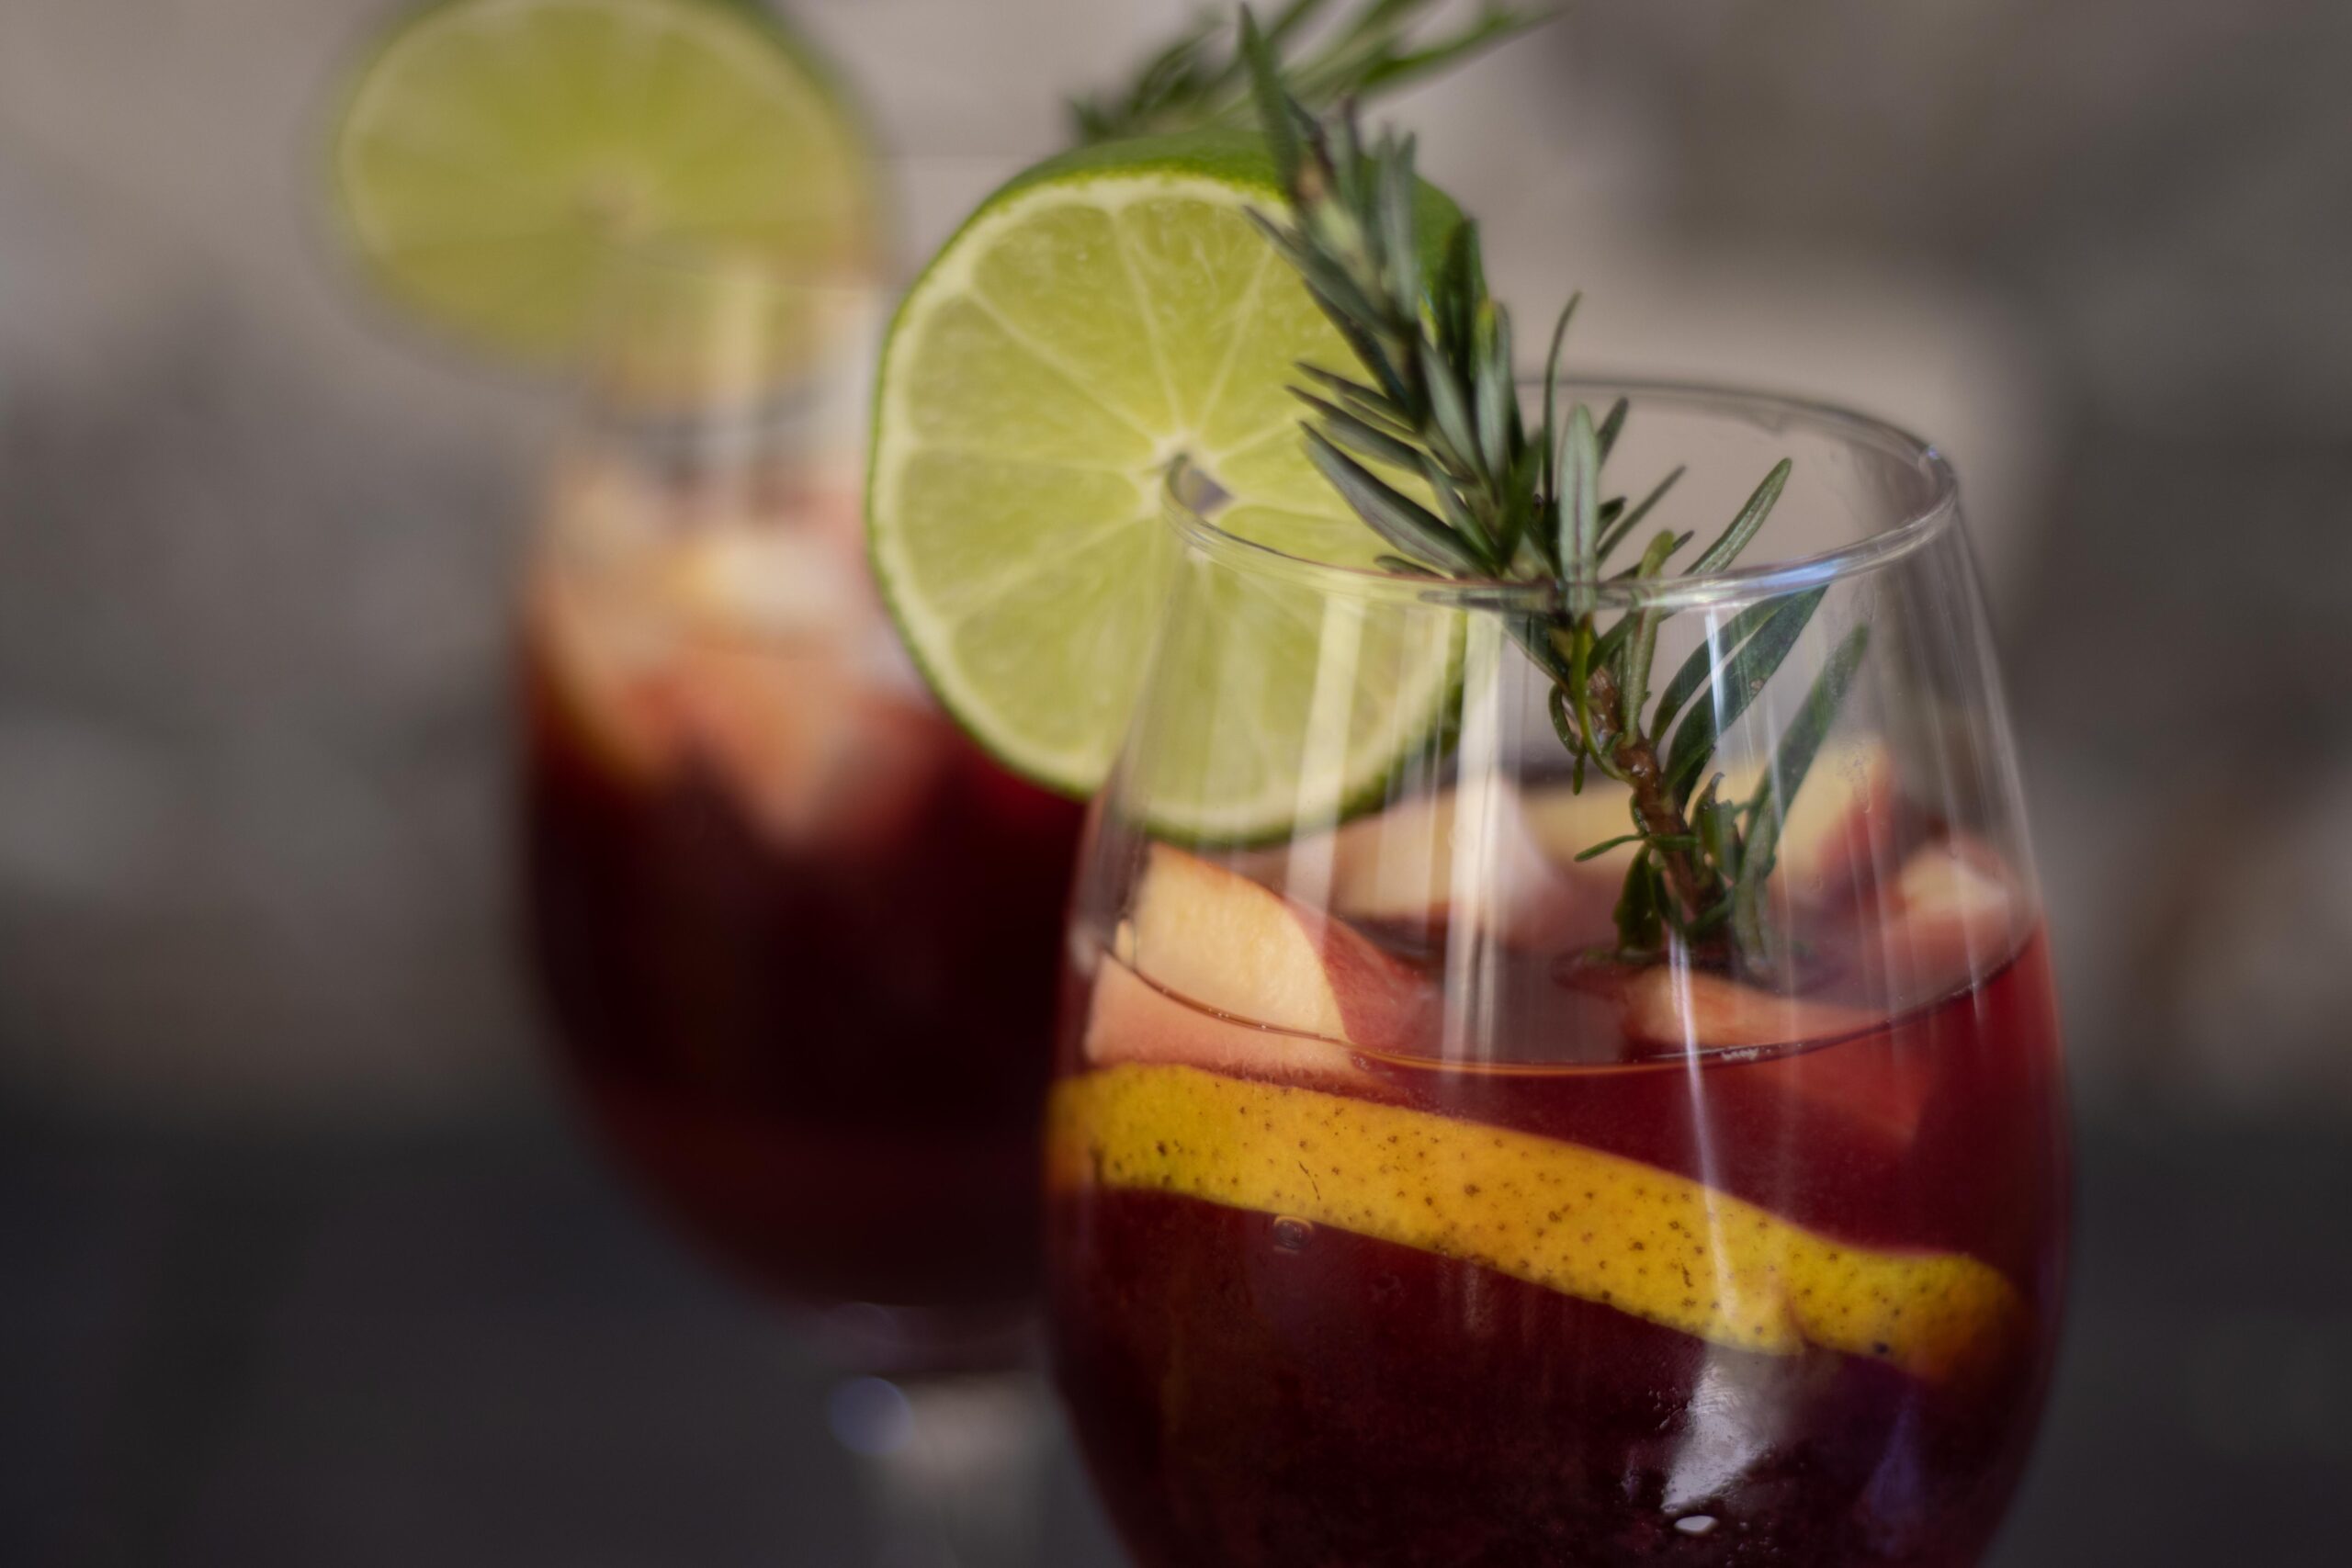 Spice up a sangria with apples and apple cider for the holidays. These Thanksgiving cocktails are a delicious and fruity twist to everyones favorite alcoholic drink. Pictured: Sangrias with apple slices and other fruits.